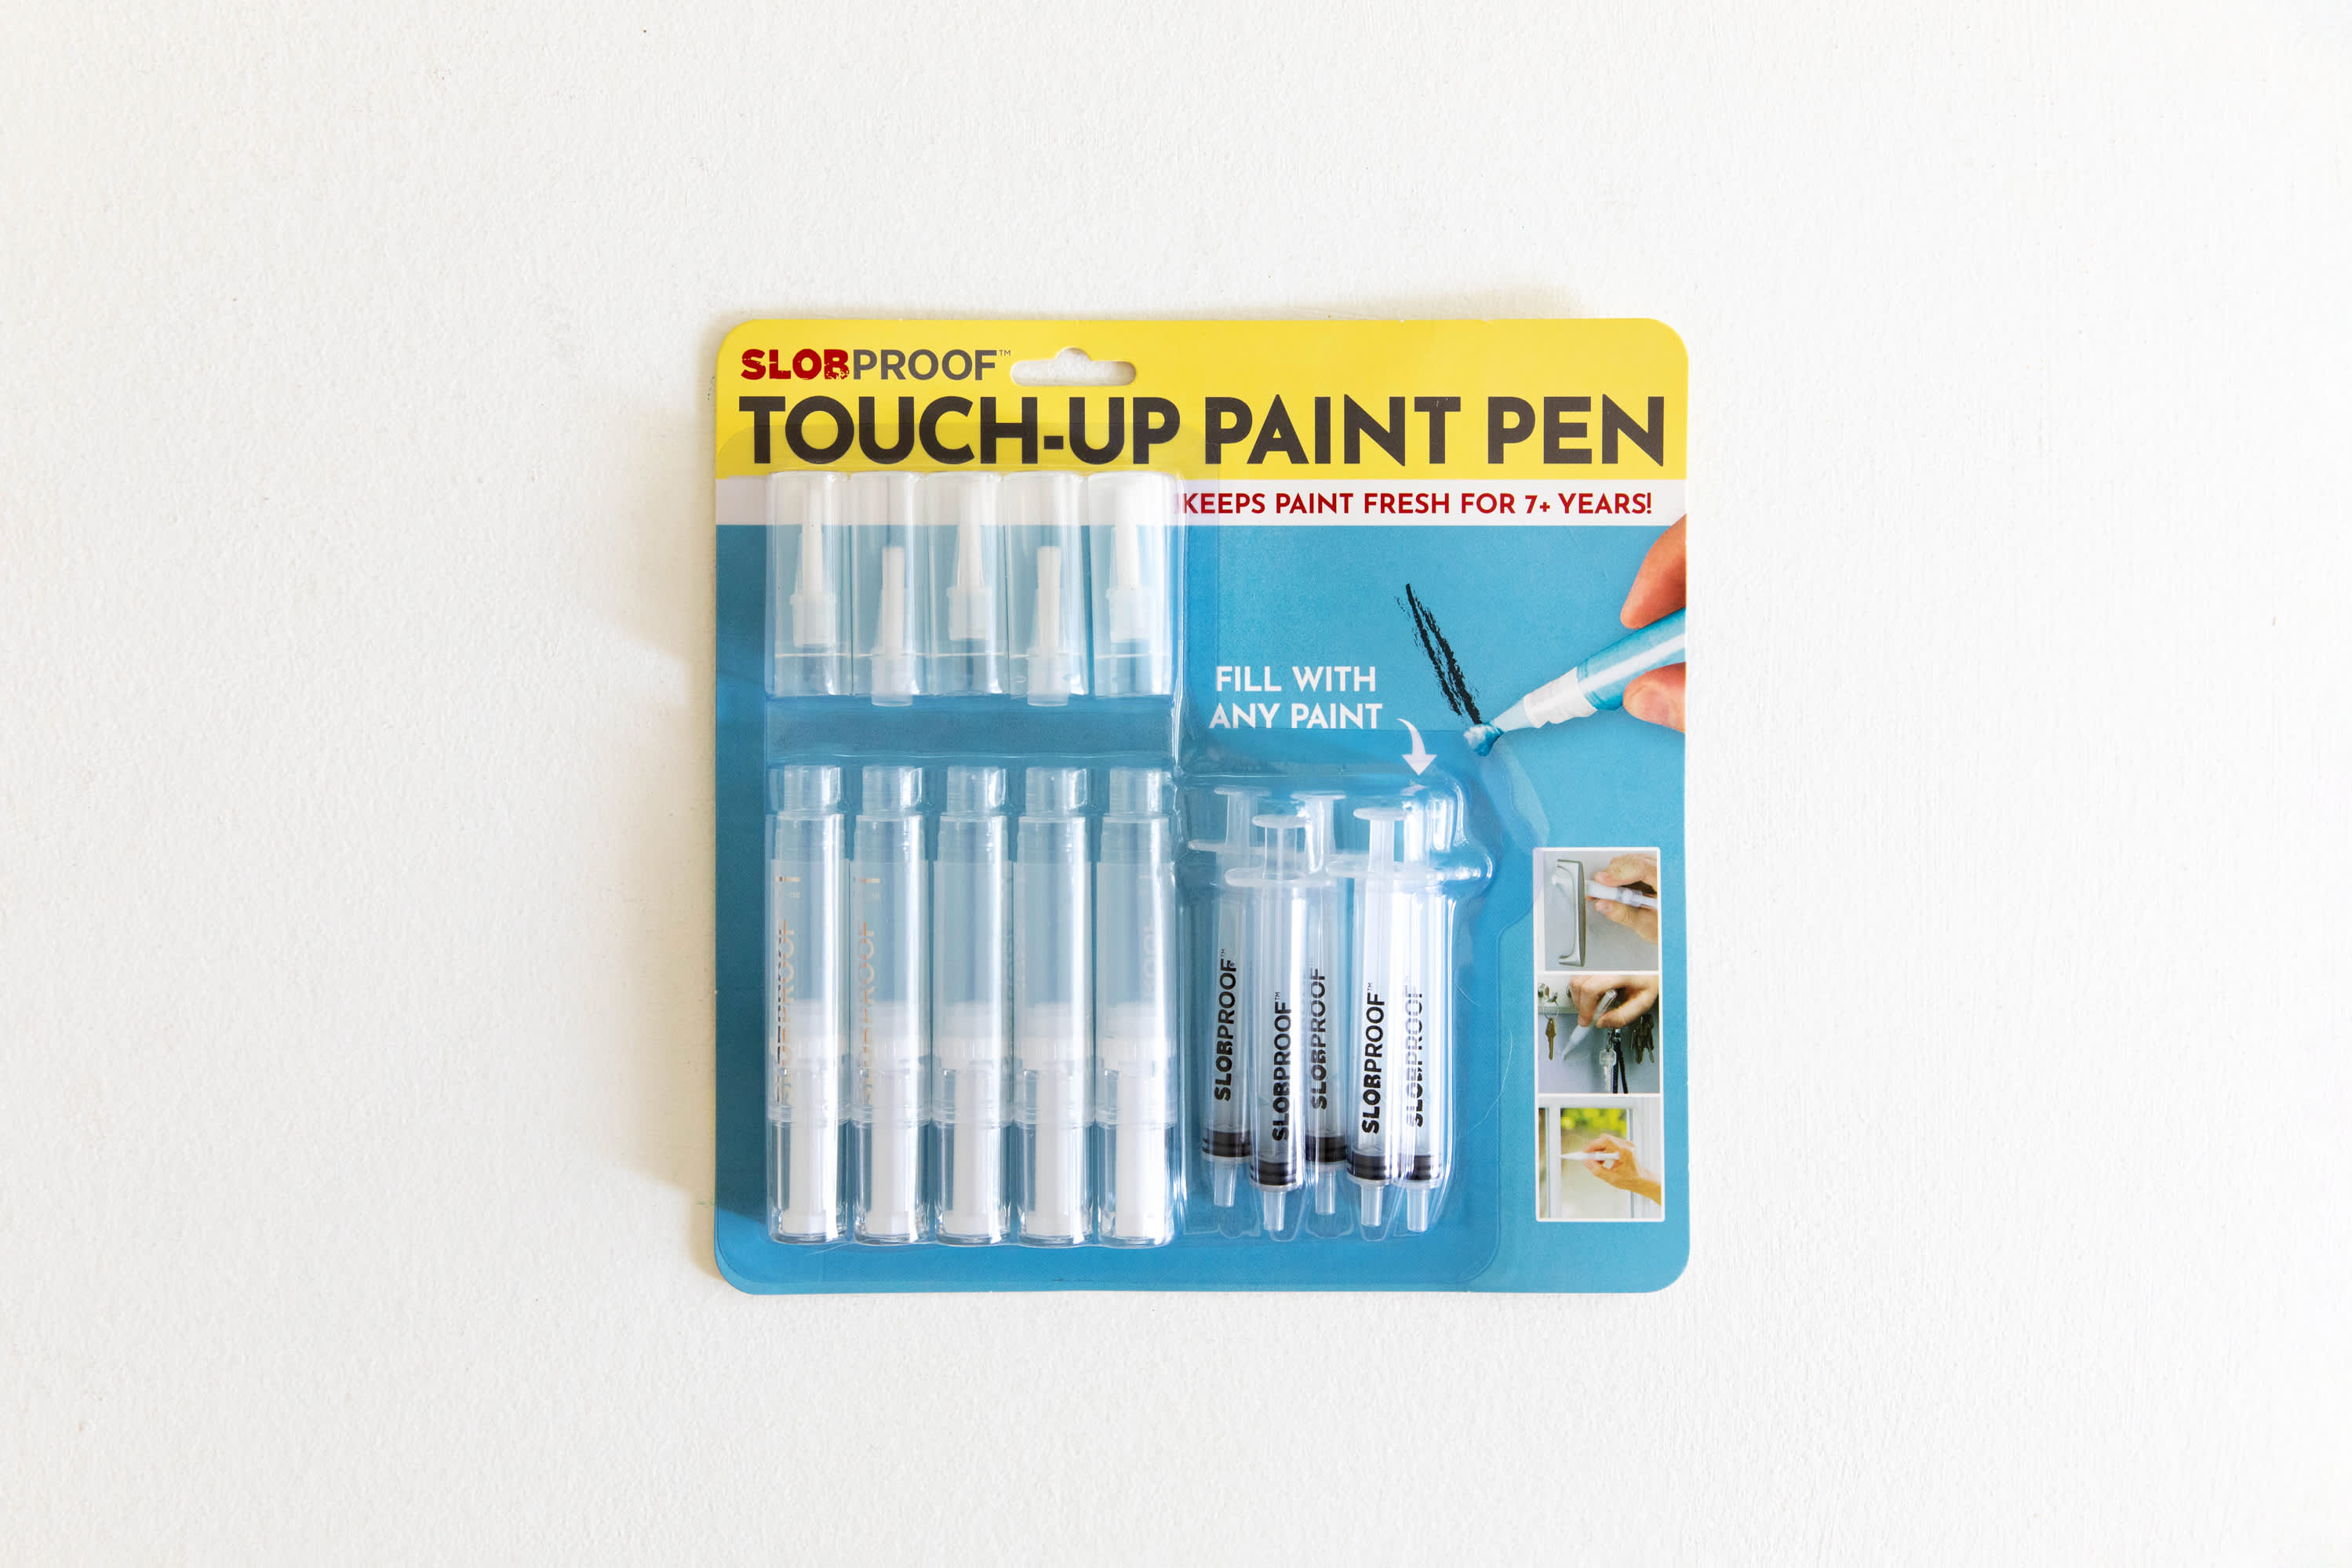 Anyone has experience with these touch up pens? Any tips before